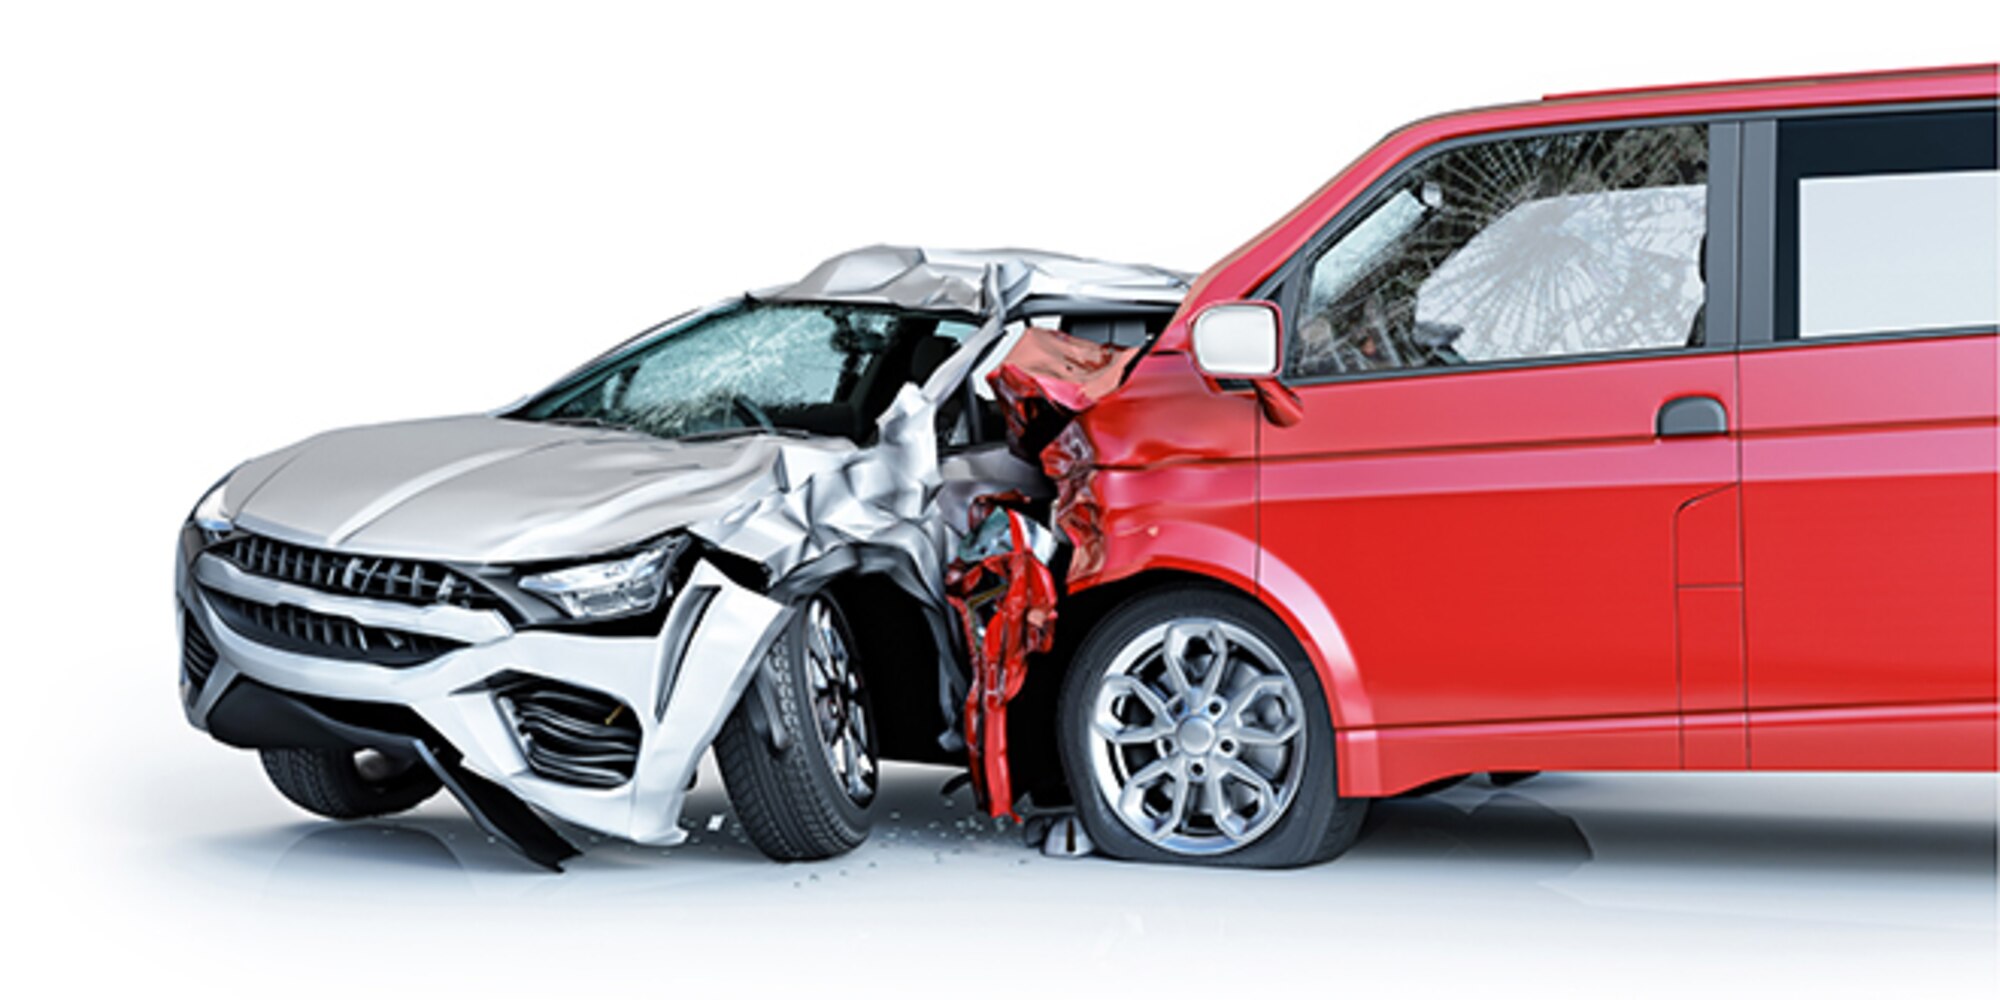 Two-car accident. A red van against a silver sedan. Major damage. Concept totaled vehicles.